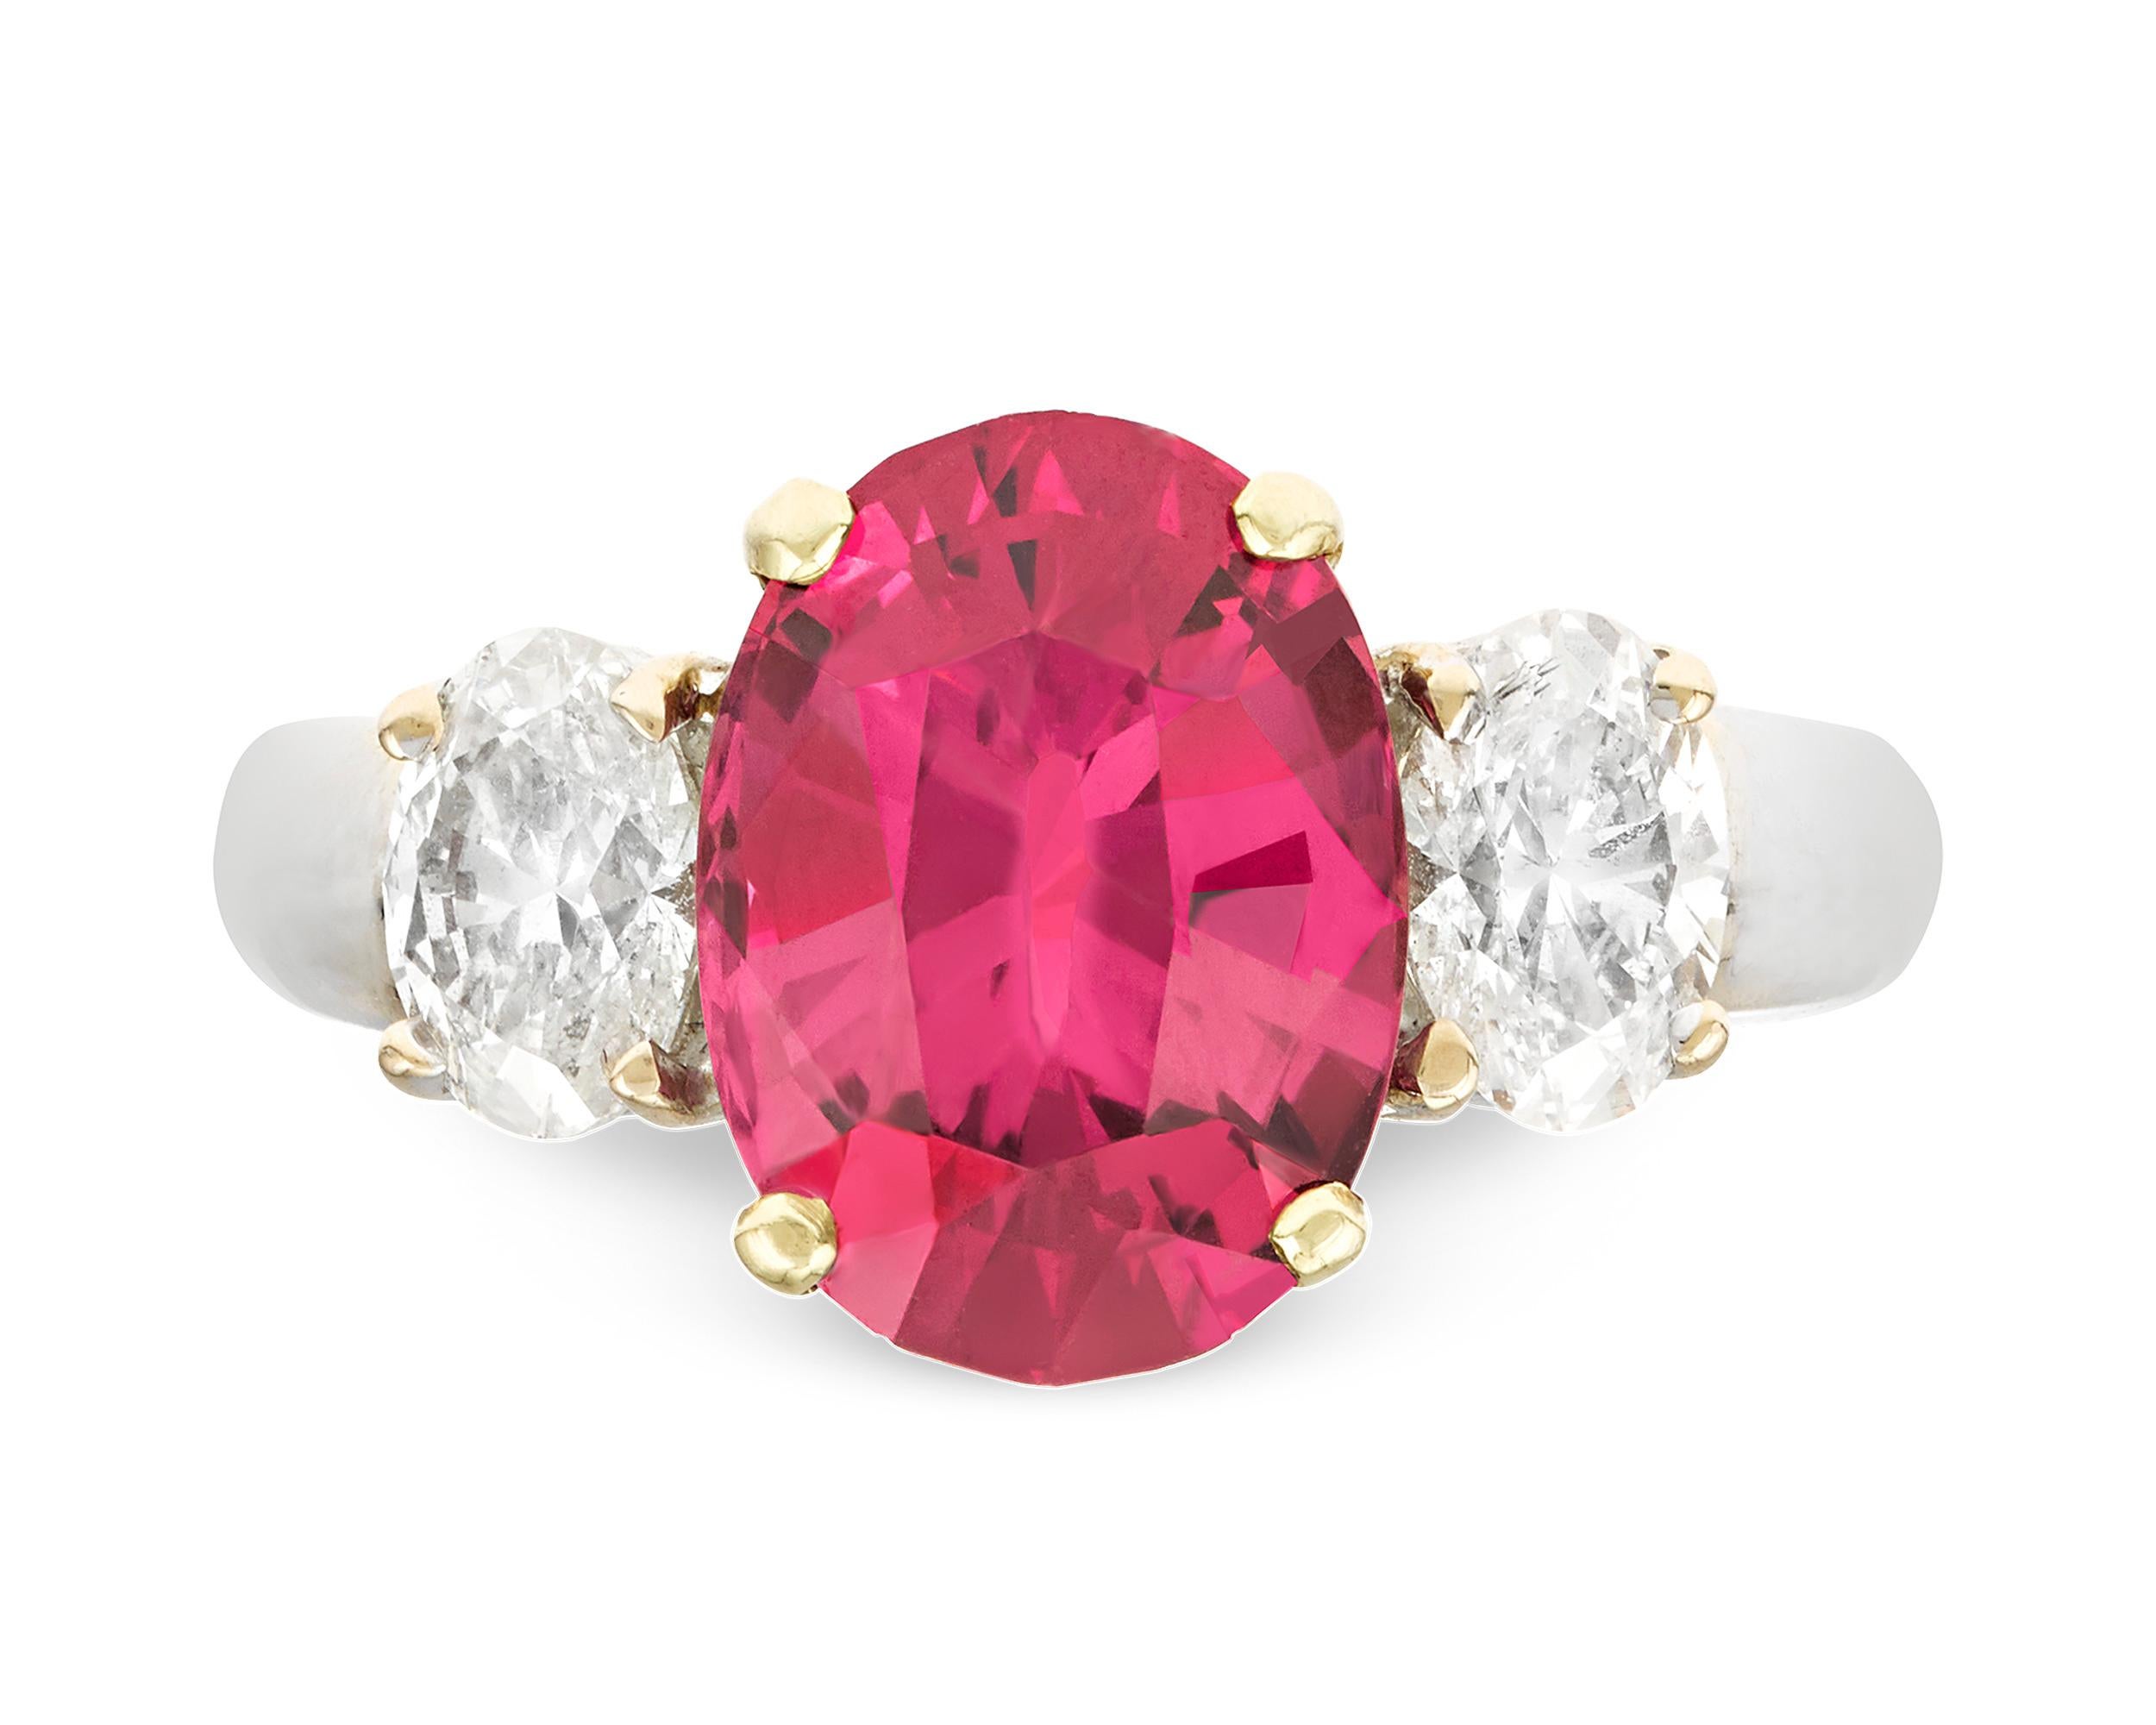 Modern Oval Red Spinel Ring, 3.76 Carat